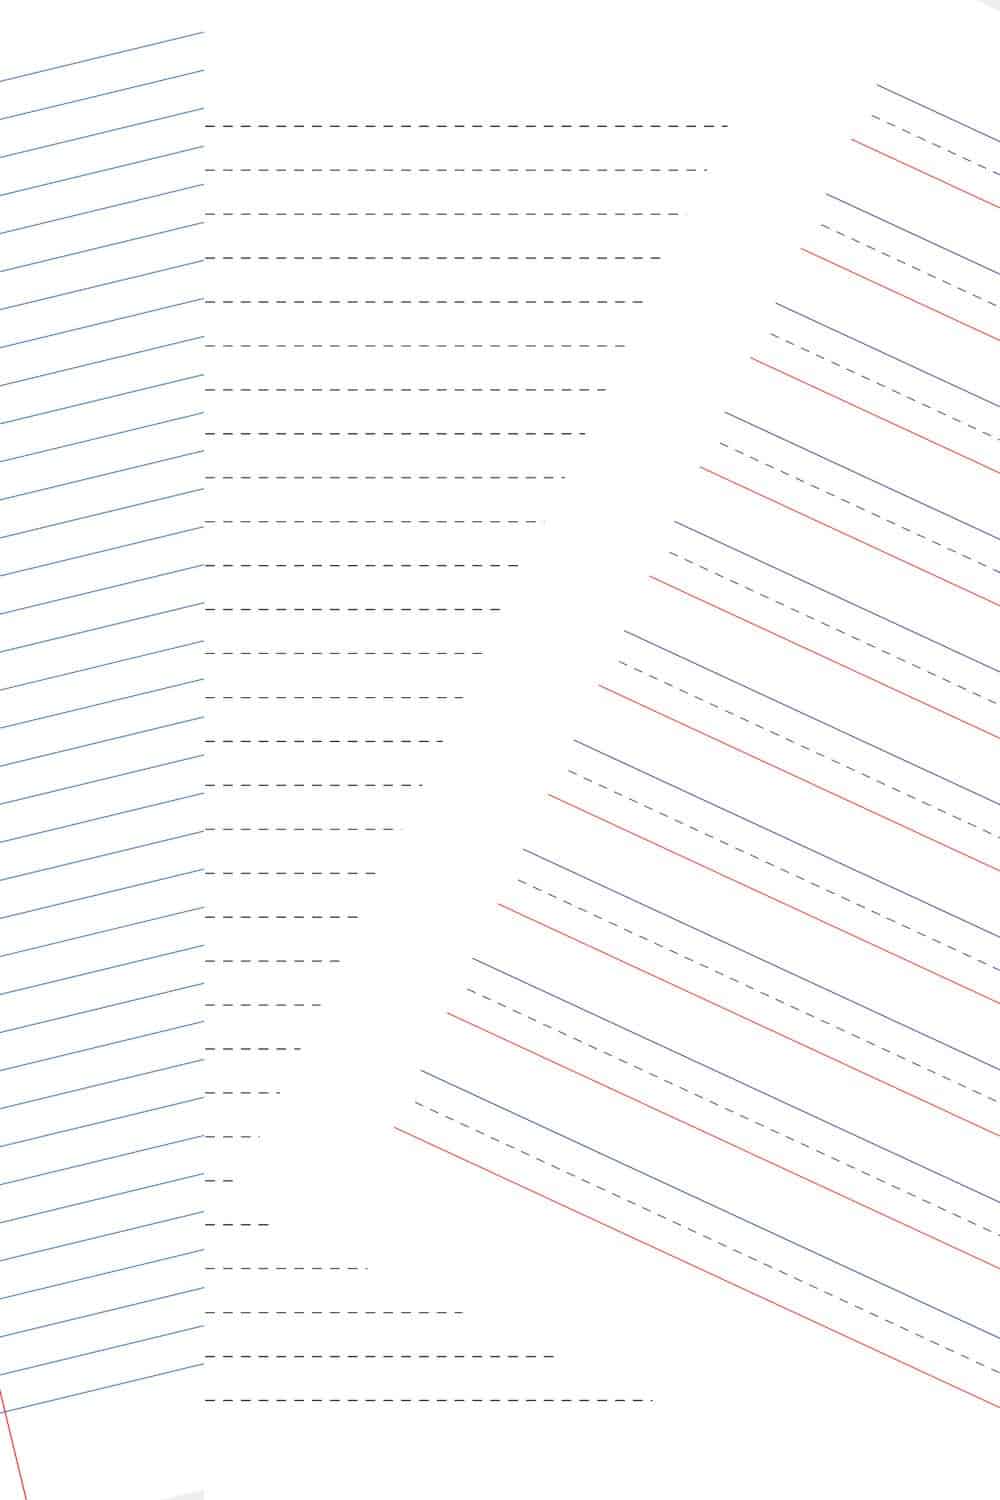 Images of free printable lined paper with dotted lines, manuscript lines and ruled lines.